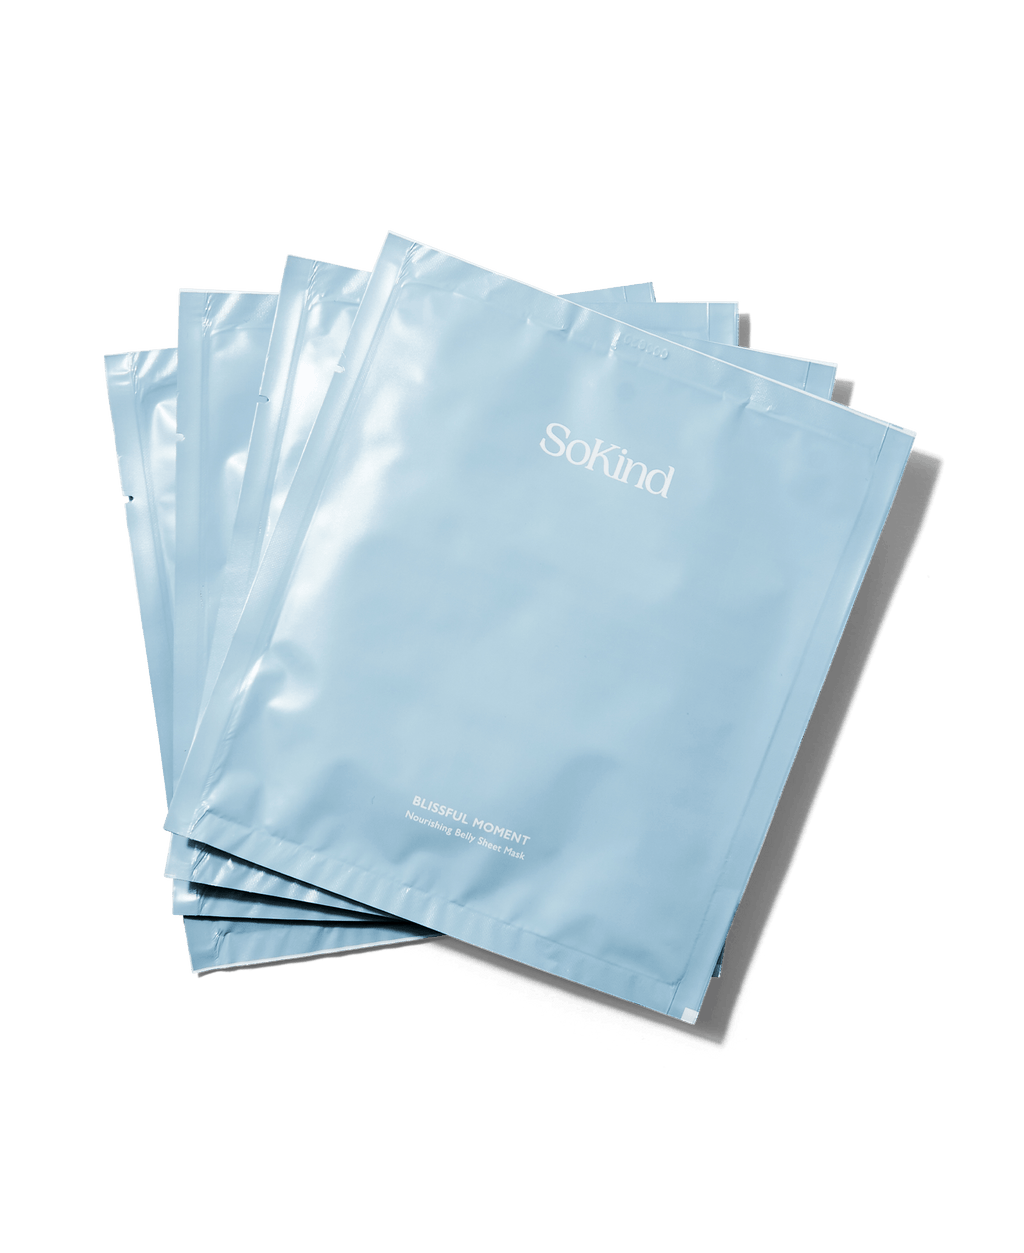 SO KIND - Blissful moment (Nourishing Belly Sheet Masks) - The Natural Beauty Club